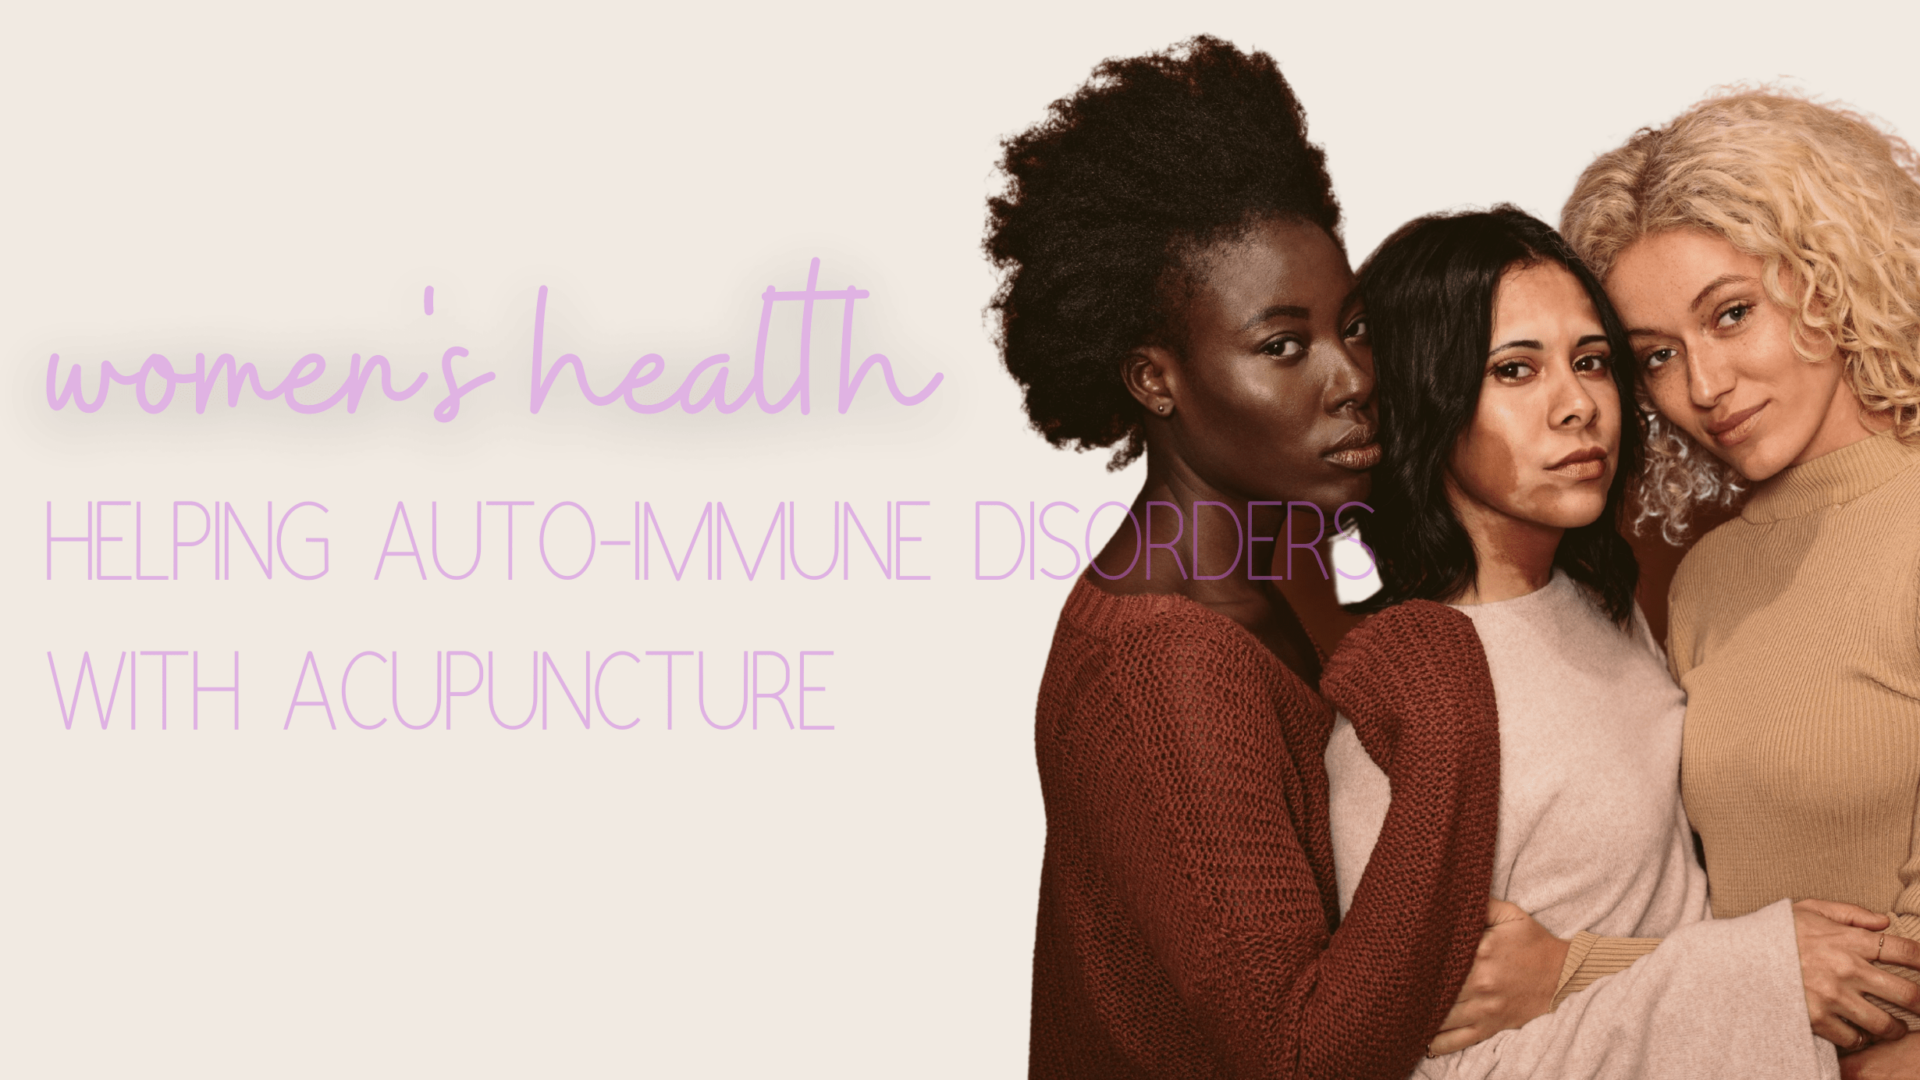 three women holding each other and looking at the camera; caption says women's health: helping autoimmune disorders with acupuncture